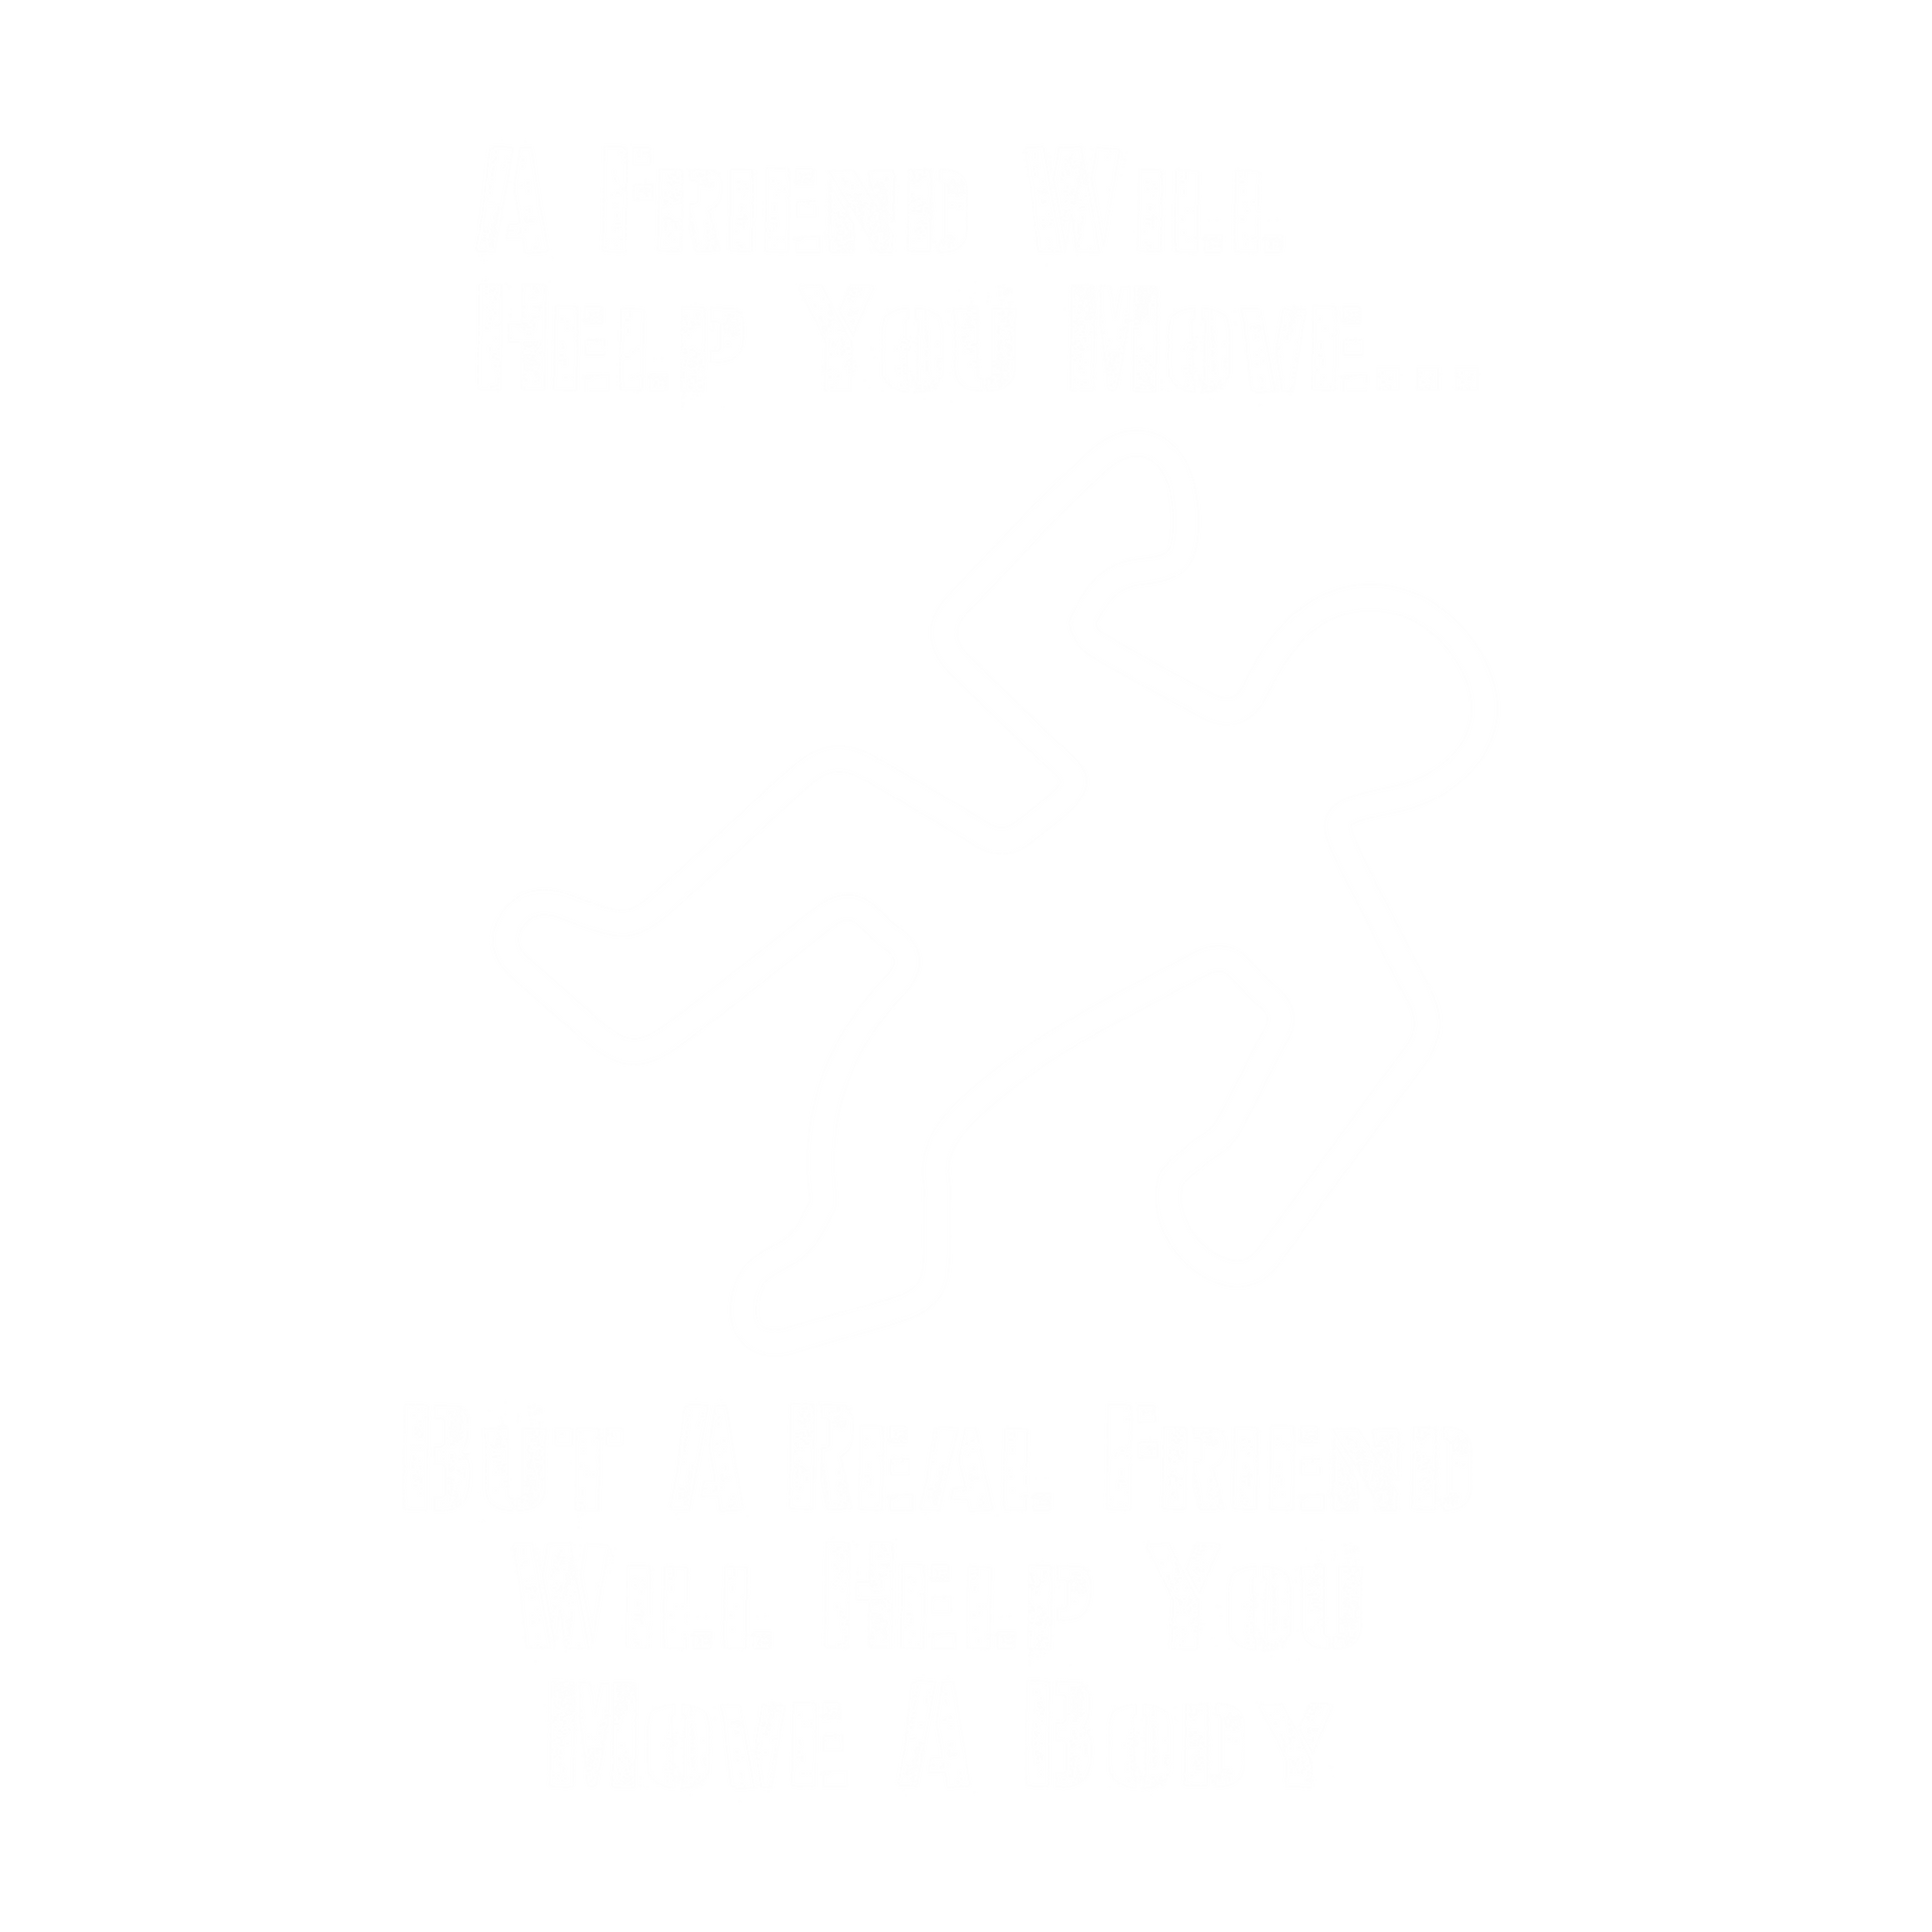 A Friend Will Help You Moveâ€¦ But A Real Friend Will Help You Move A Body